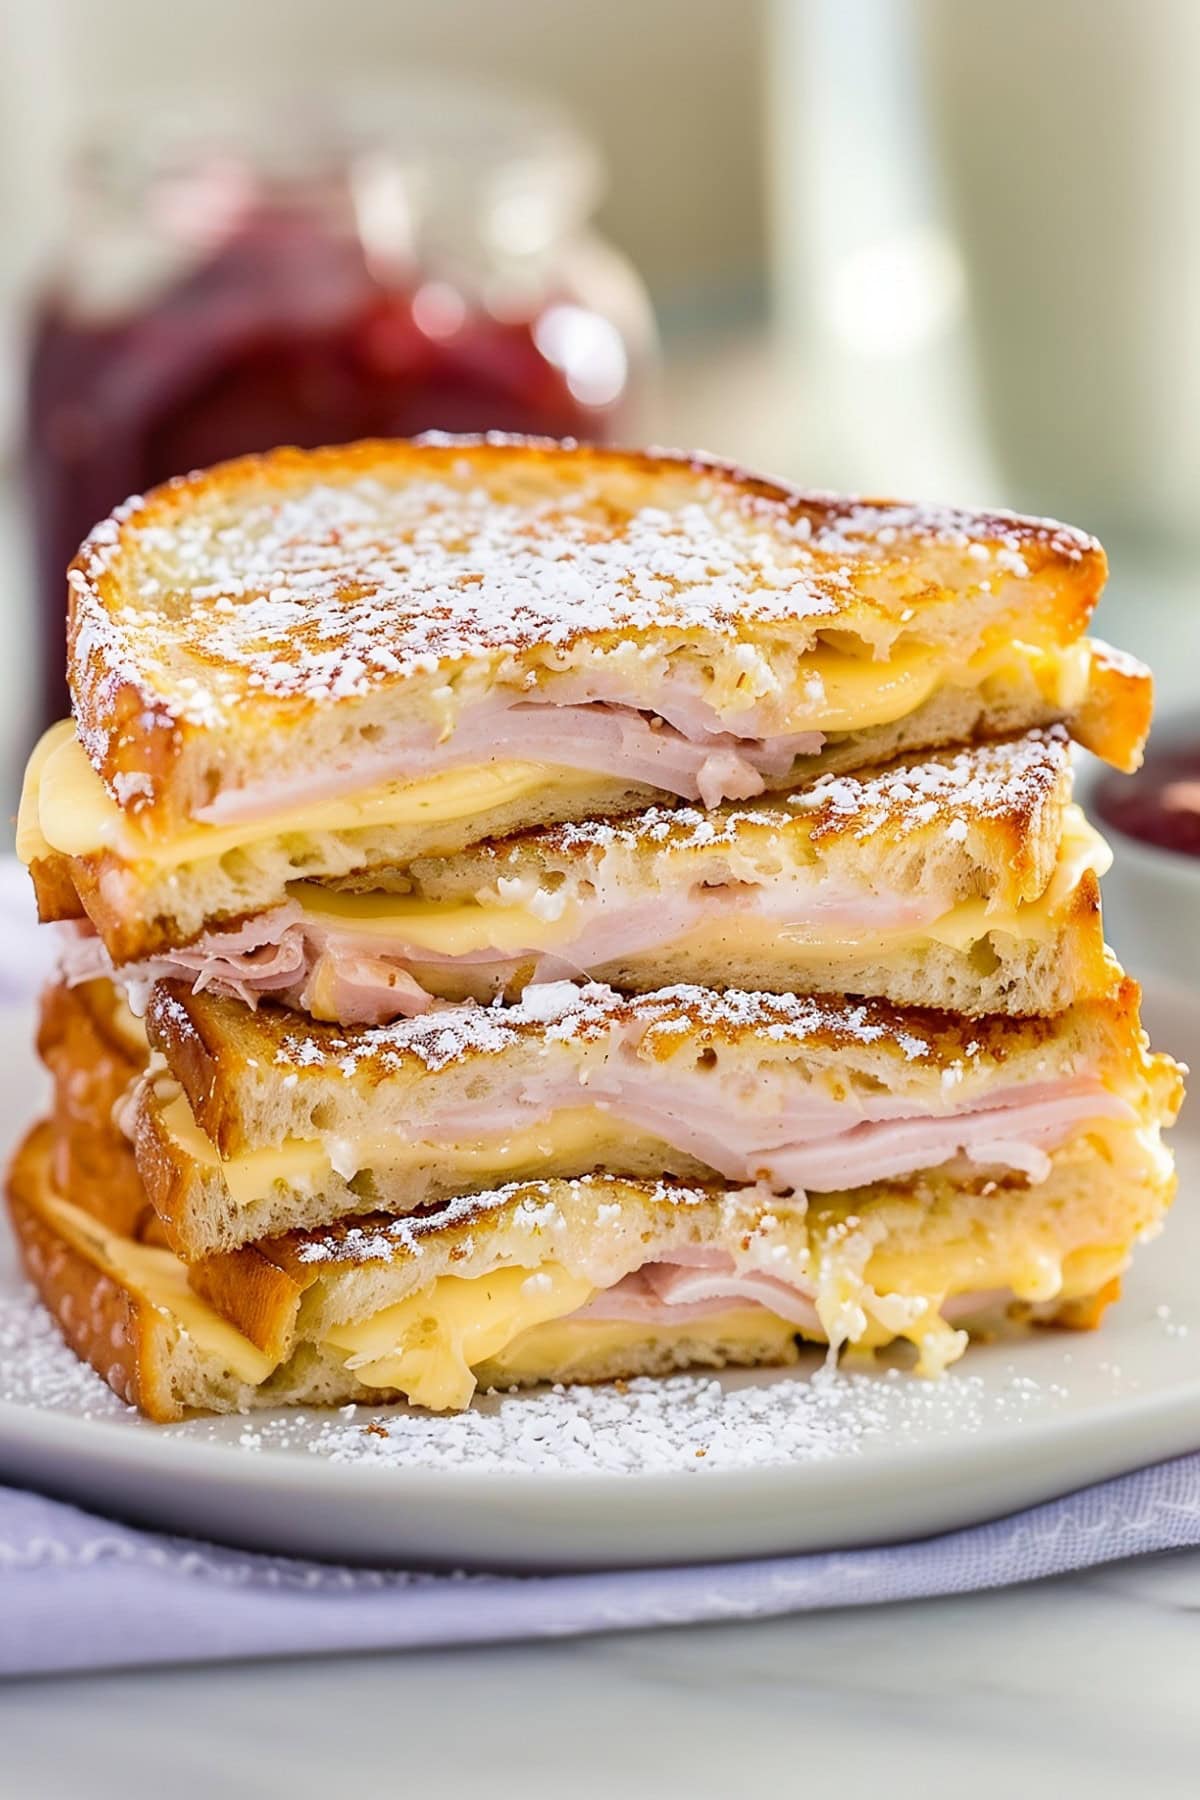 Classic Monte Cristo sandwich, a mouthwatering combination of ham, turkey, and Swiss cheese, dipped in egg batter and grilled to perfection